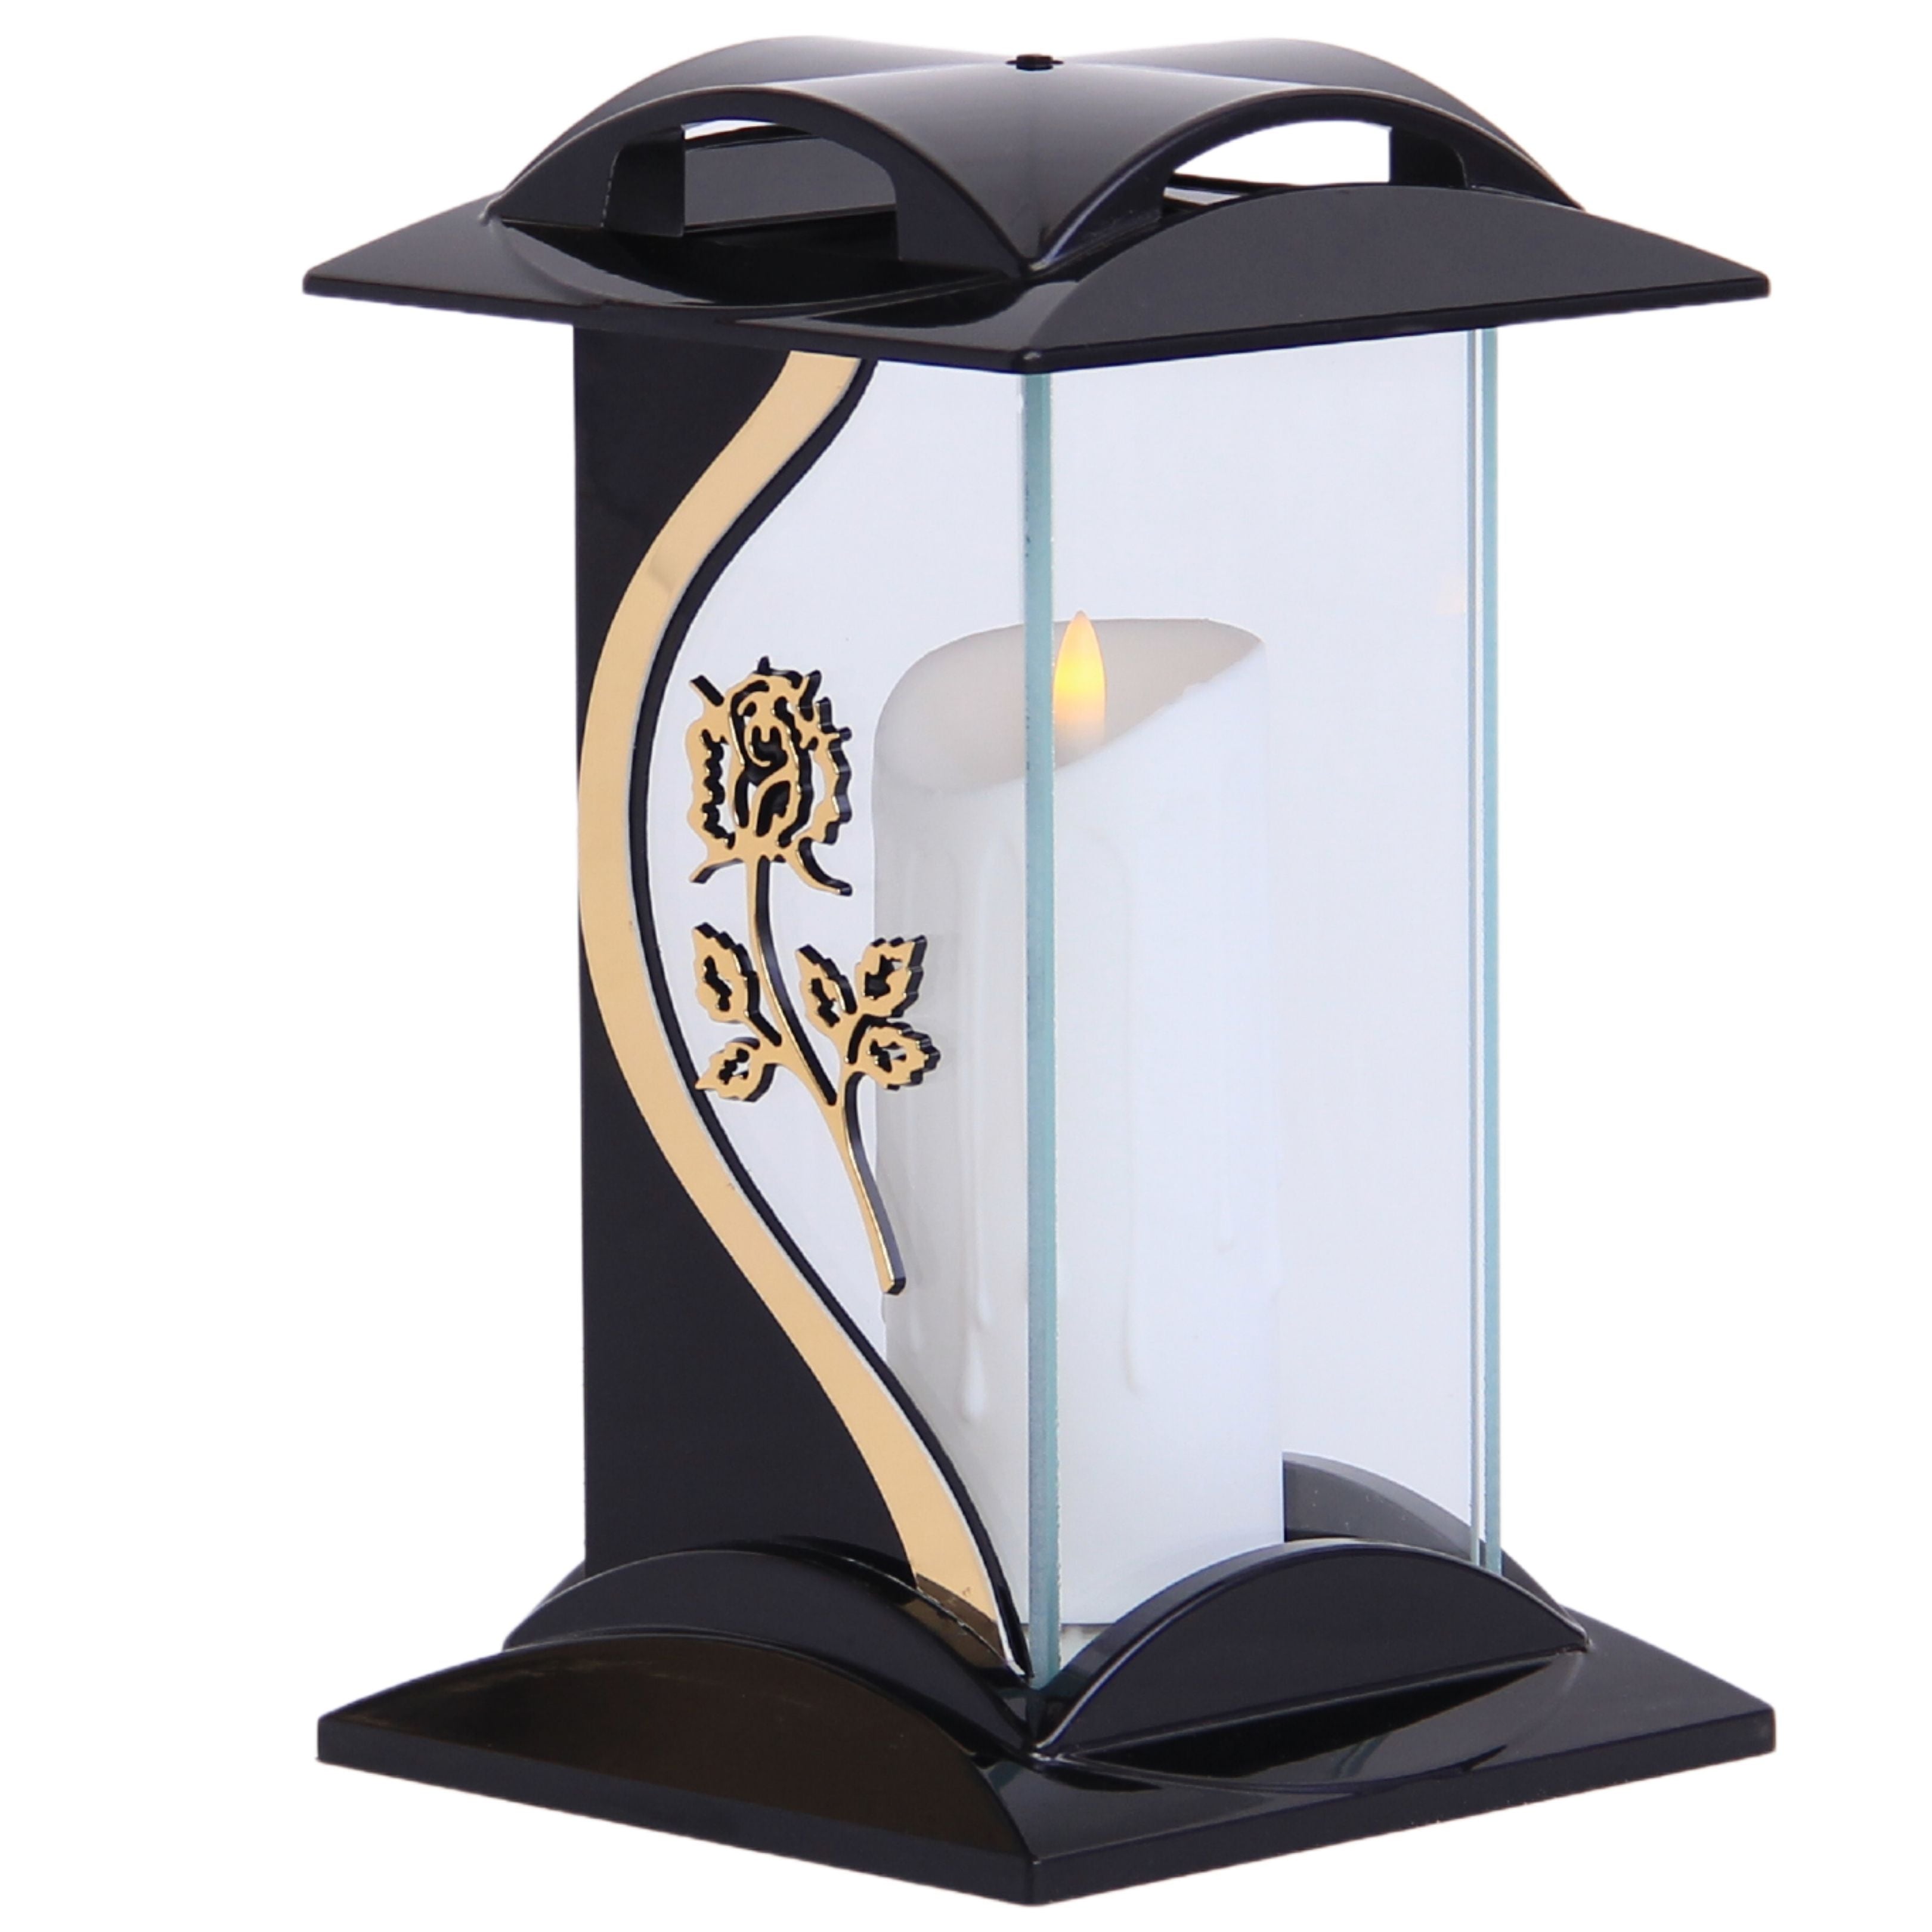 Large Memorial Grave Lantern with Candle Cemetery Ornaments & Grave Decorations